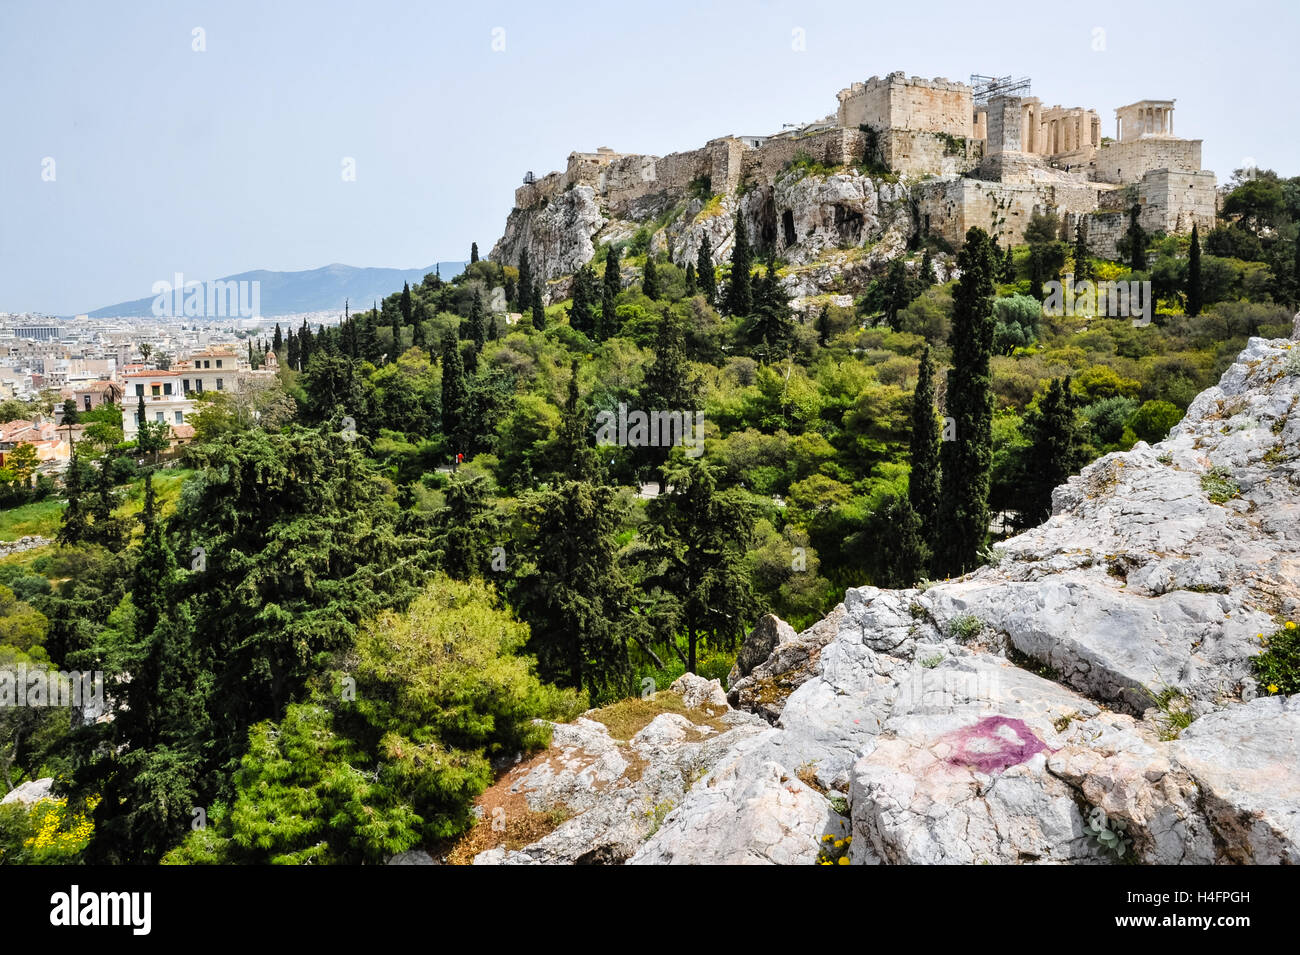 Athens, Greece. View from Areopagus with the Acropolis hill. Stock Photo